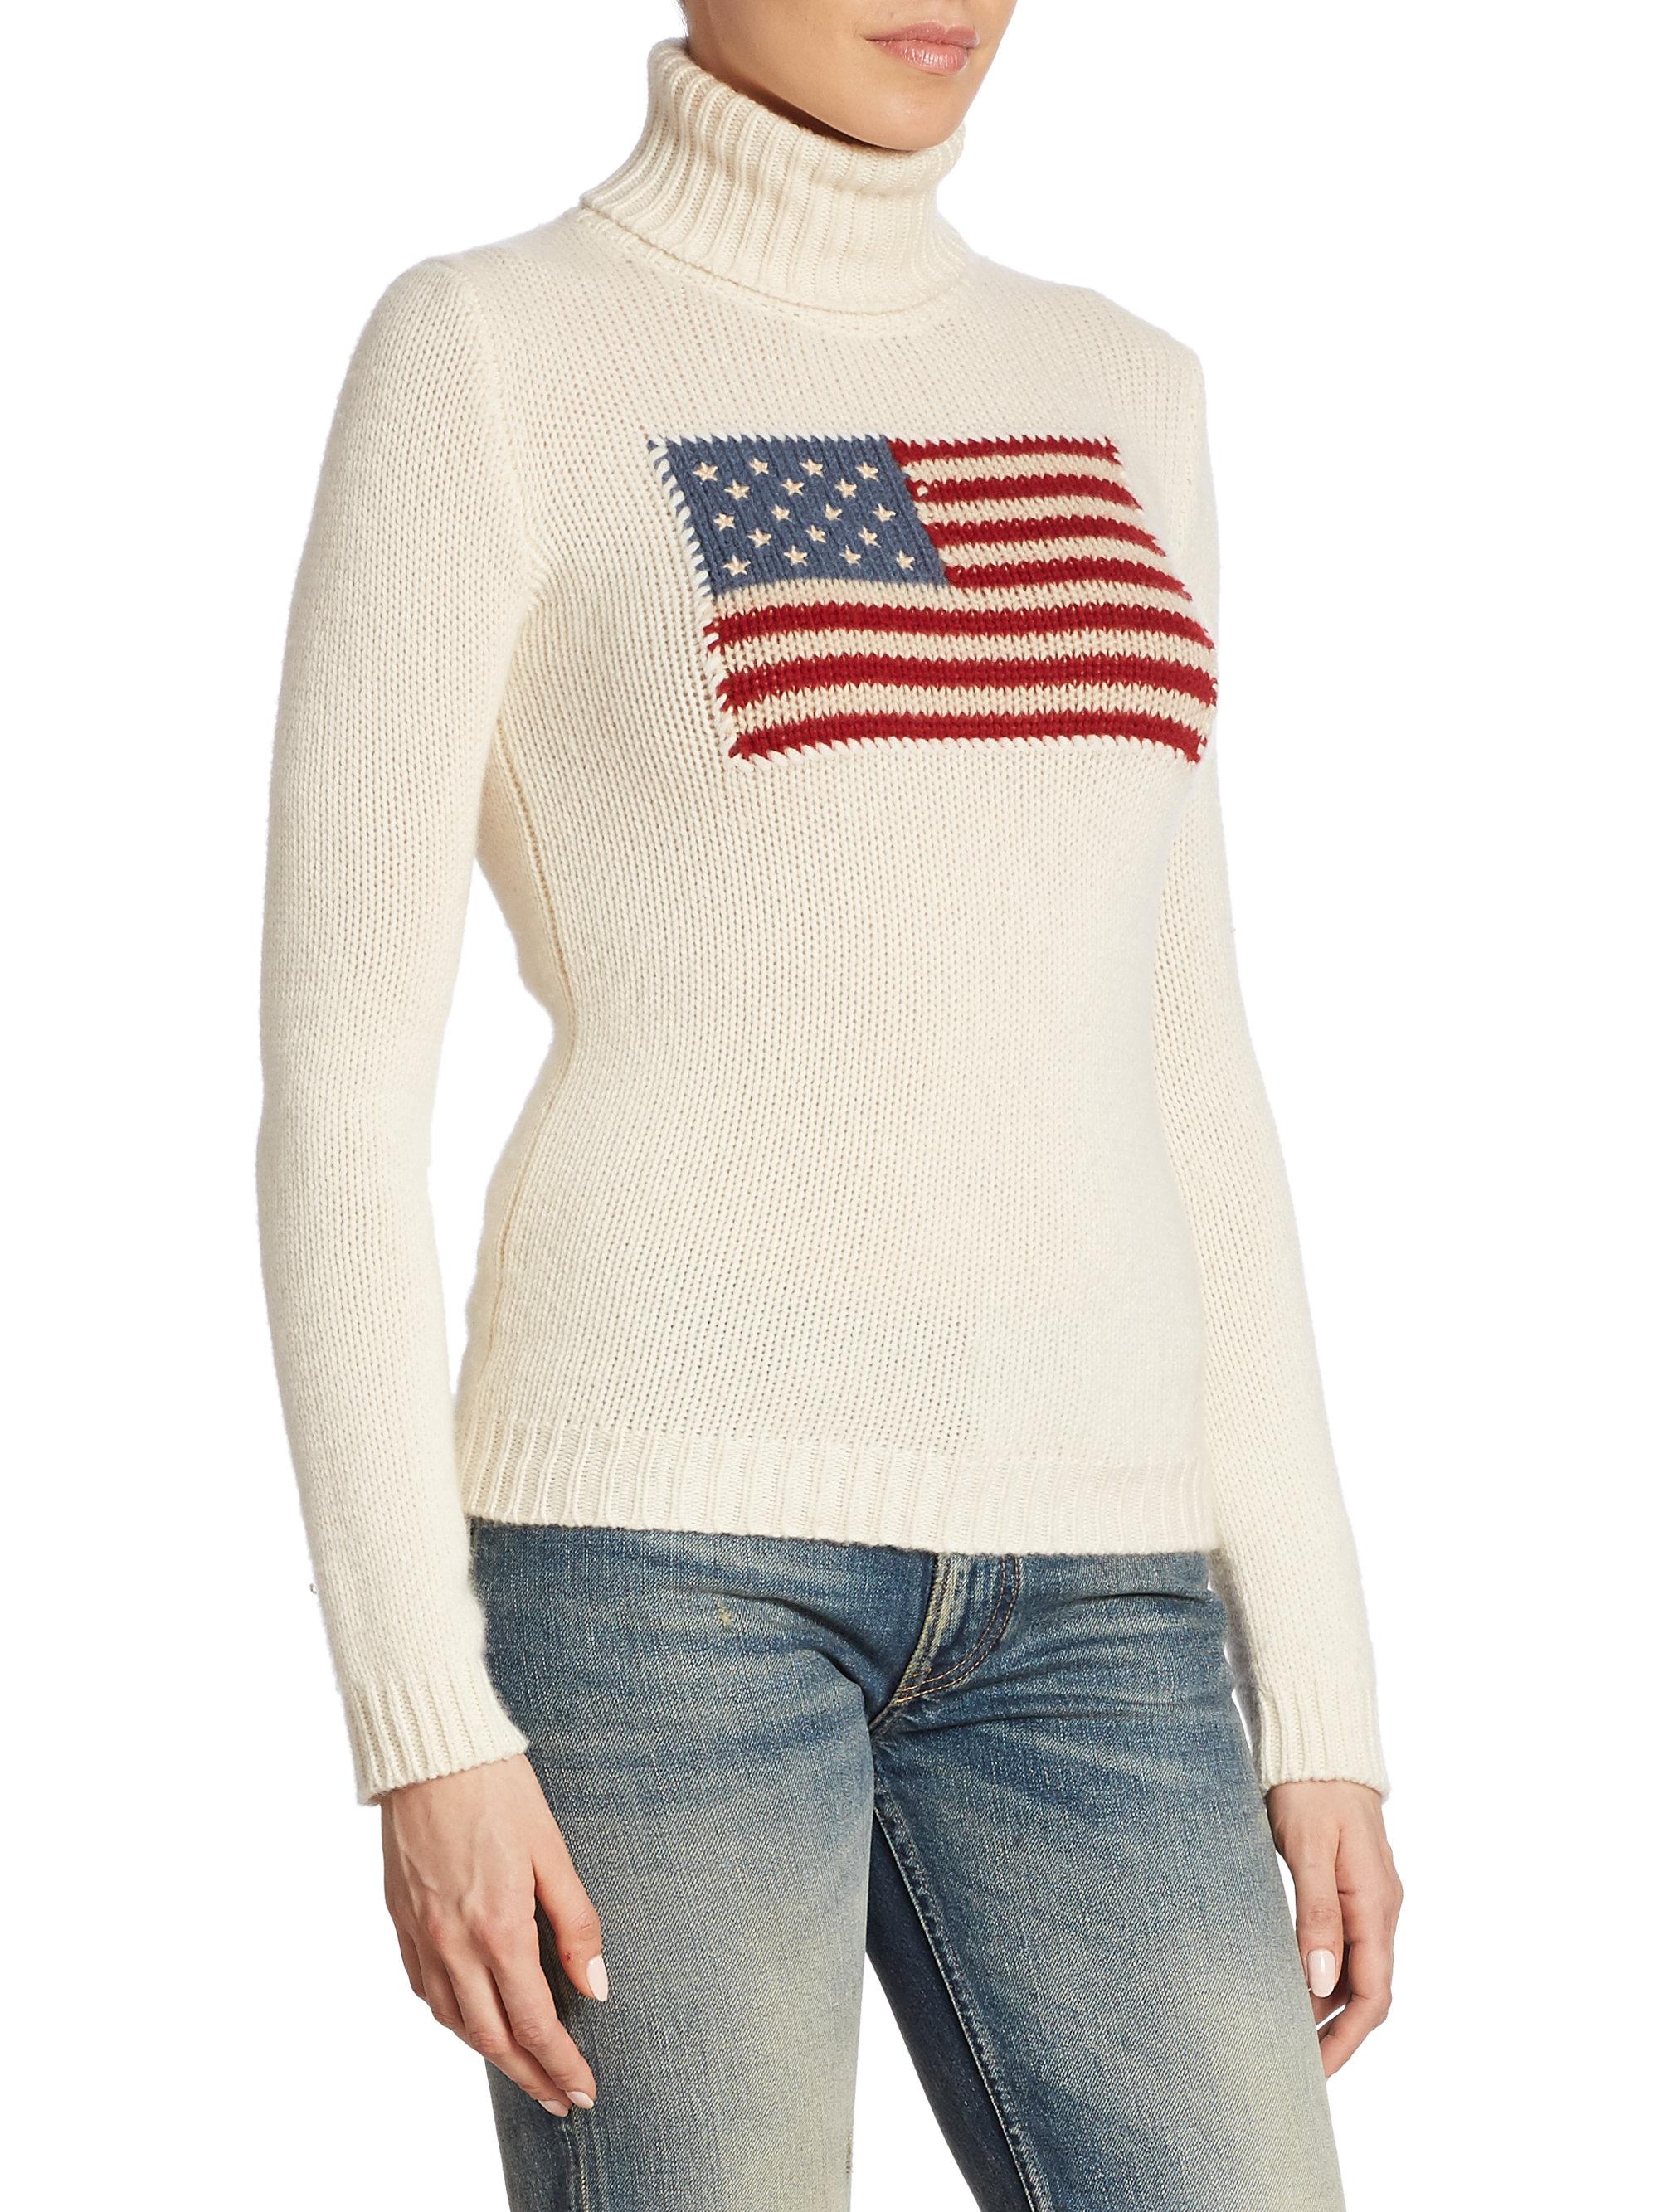 Ralph Lauren Collection Iconic Flag Cashmere Turtleneck Sweater in ...